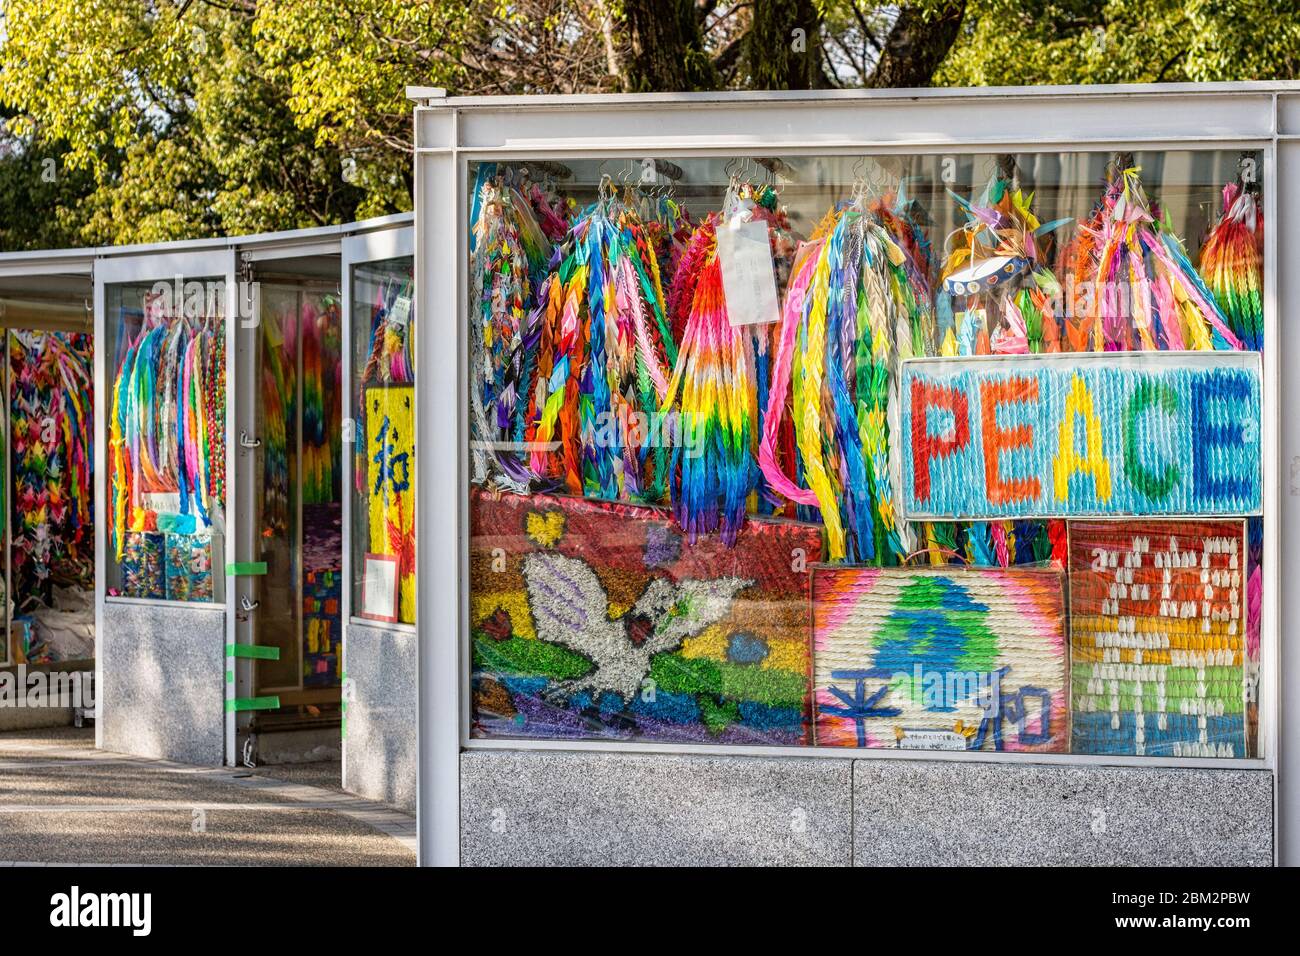 Hiroshima / Japan - December 21, 2017: Brightly colored paper cranes at the Children's Peace Monument to commemorate Sadako Sasaki and thousands of ch Stock Photo